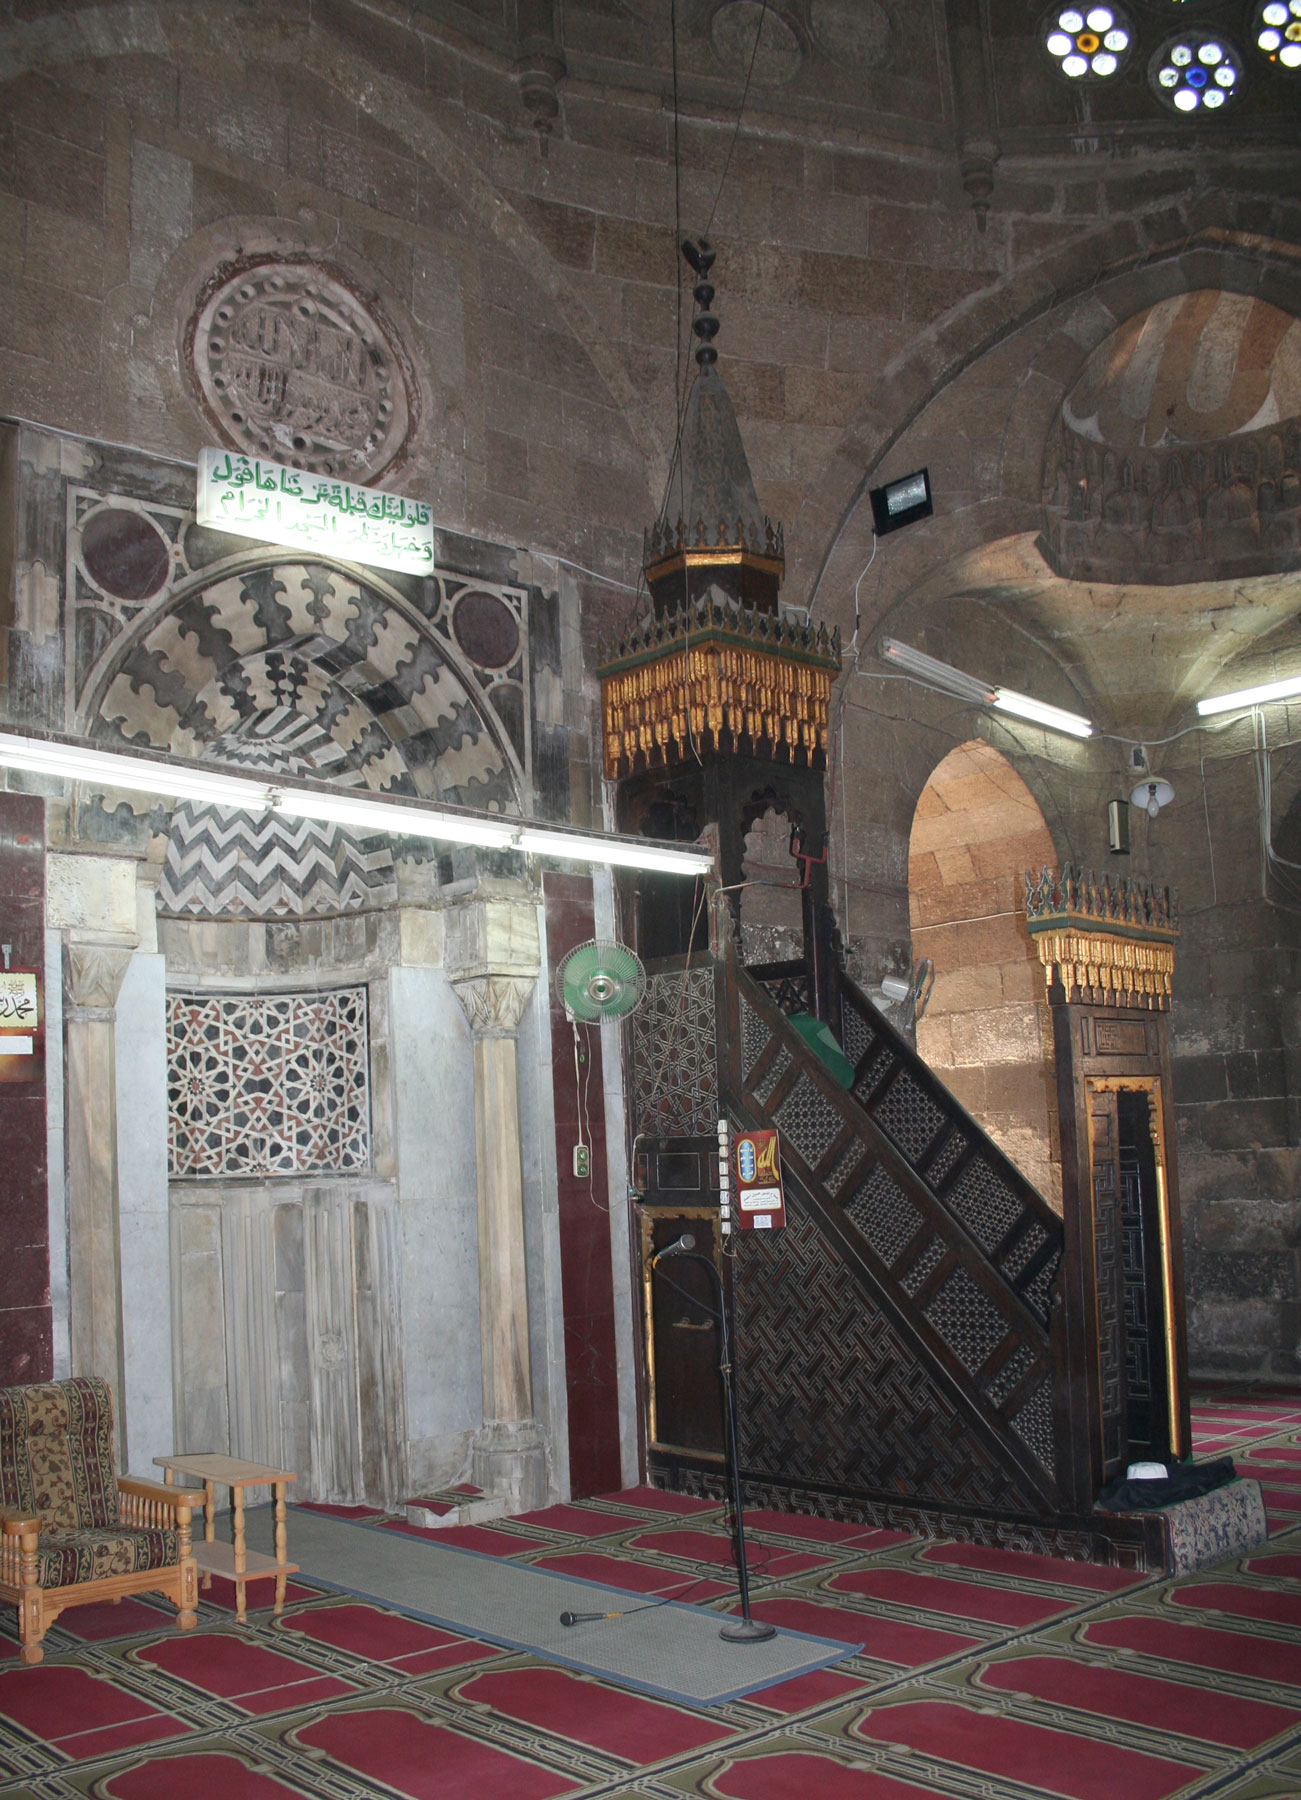 Fans and several light fixtures are attached to the delicate walls of a mosque. At the center is a microphone stand.